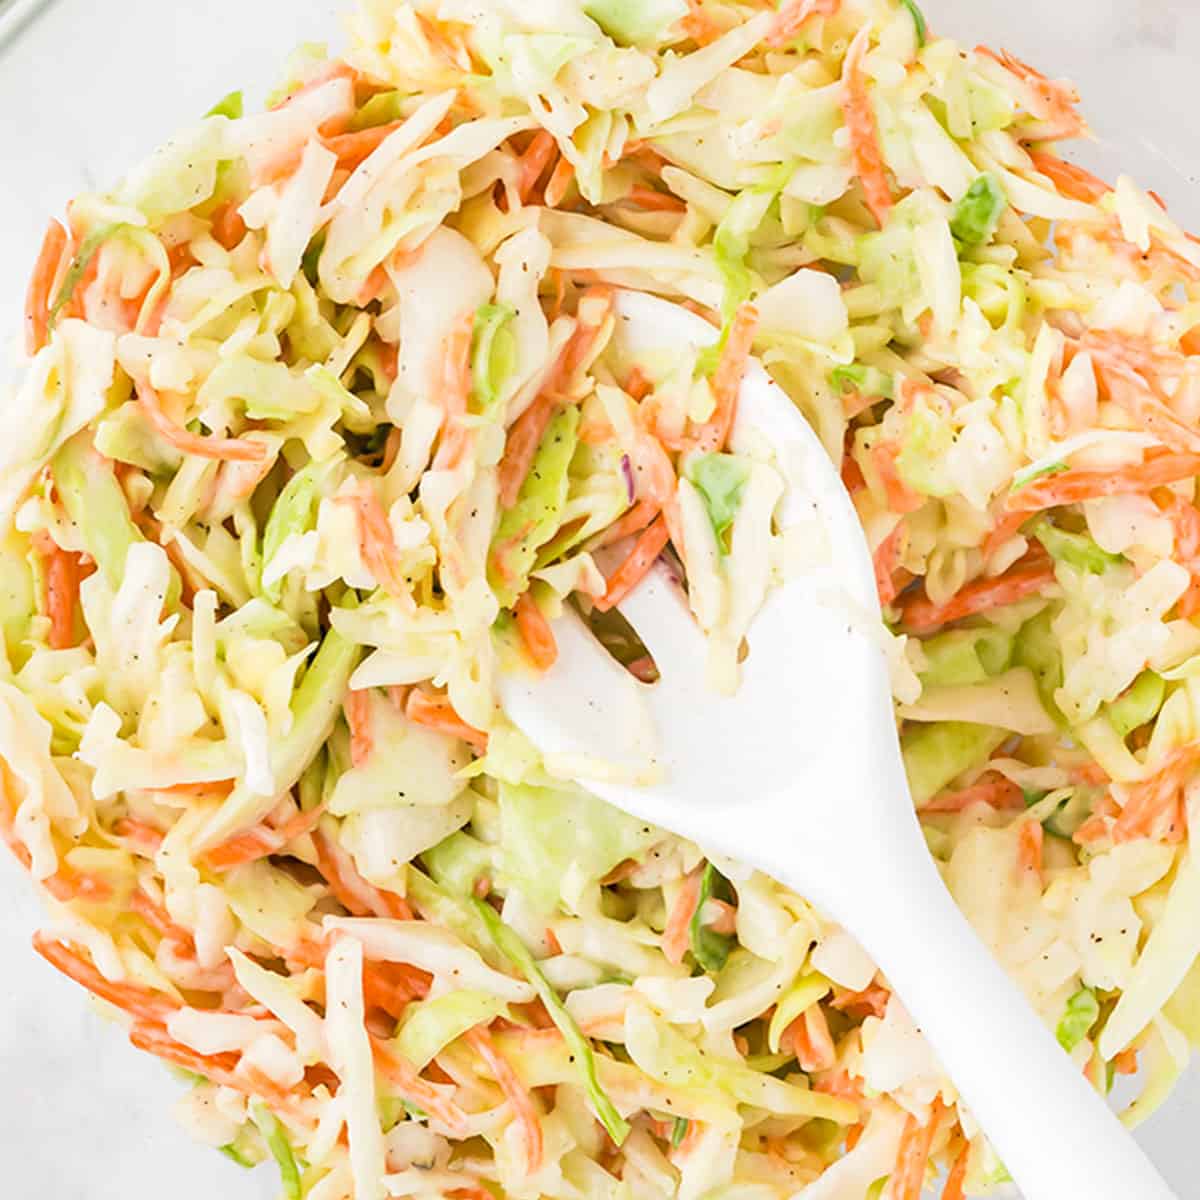 mixed coleslaw and dressing in a bowl with a white spoon